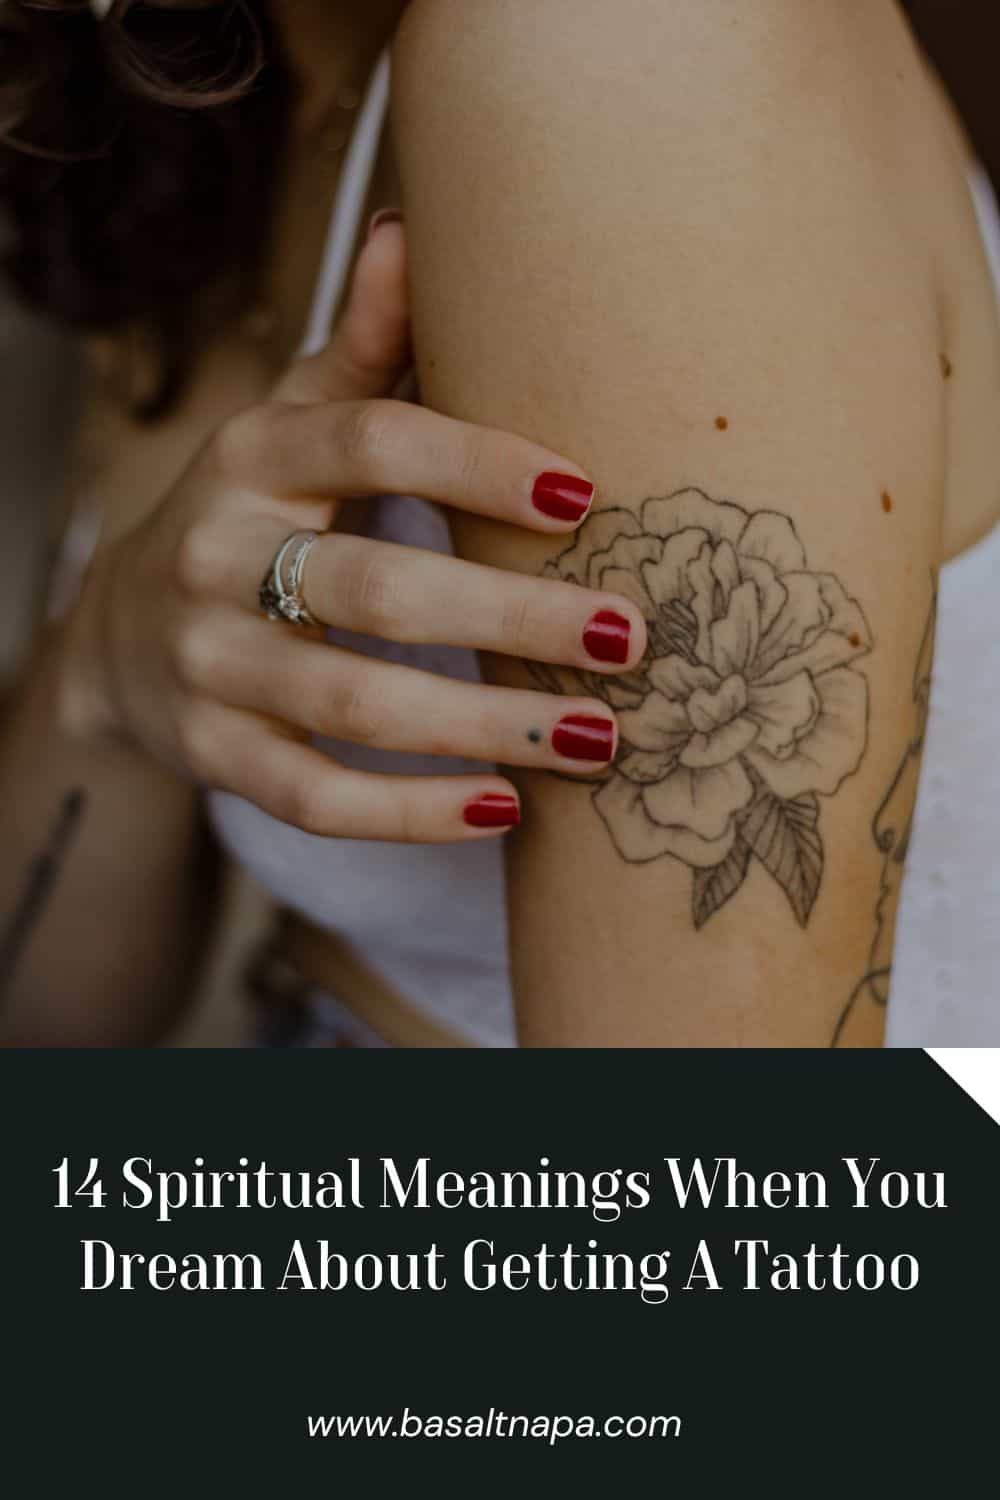 14 Spiritual Meanings When You Dream About Getting A Tattoo